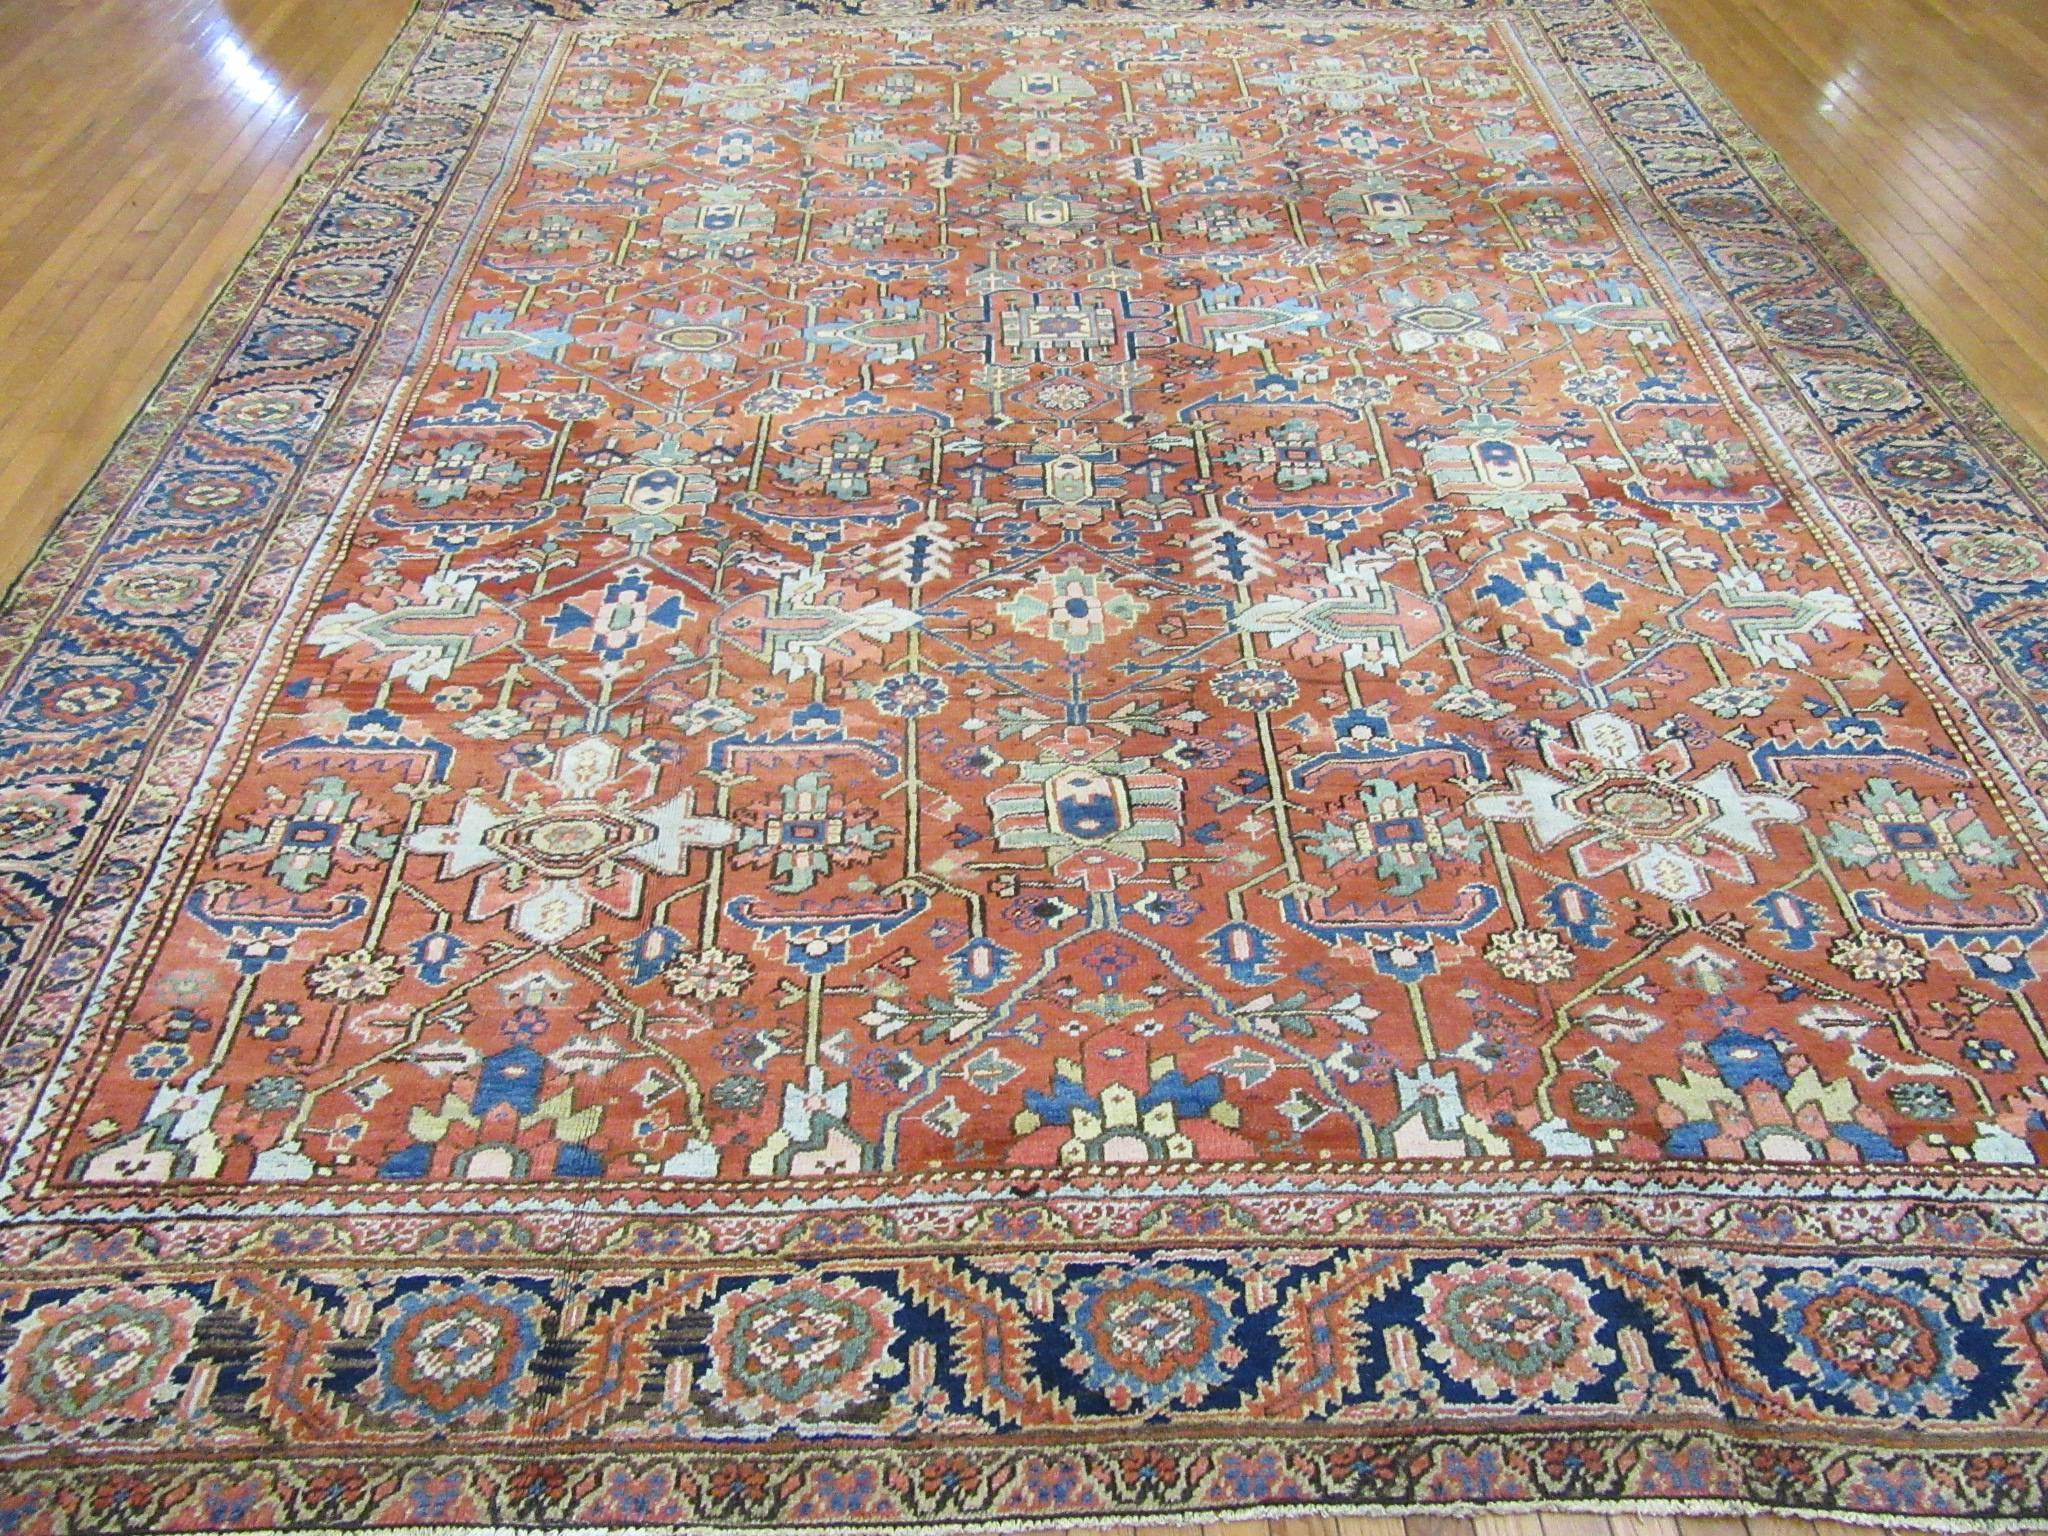 This is an antique hand-knotted rug from the village of Heriz in northwest Iran (Persian). It is made with wool colored with natural dyes on a cotton foundation. It 's none conventional all-over pattern makes it an easy rug to work with. The rug is